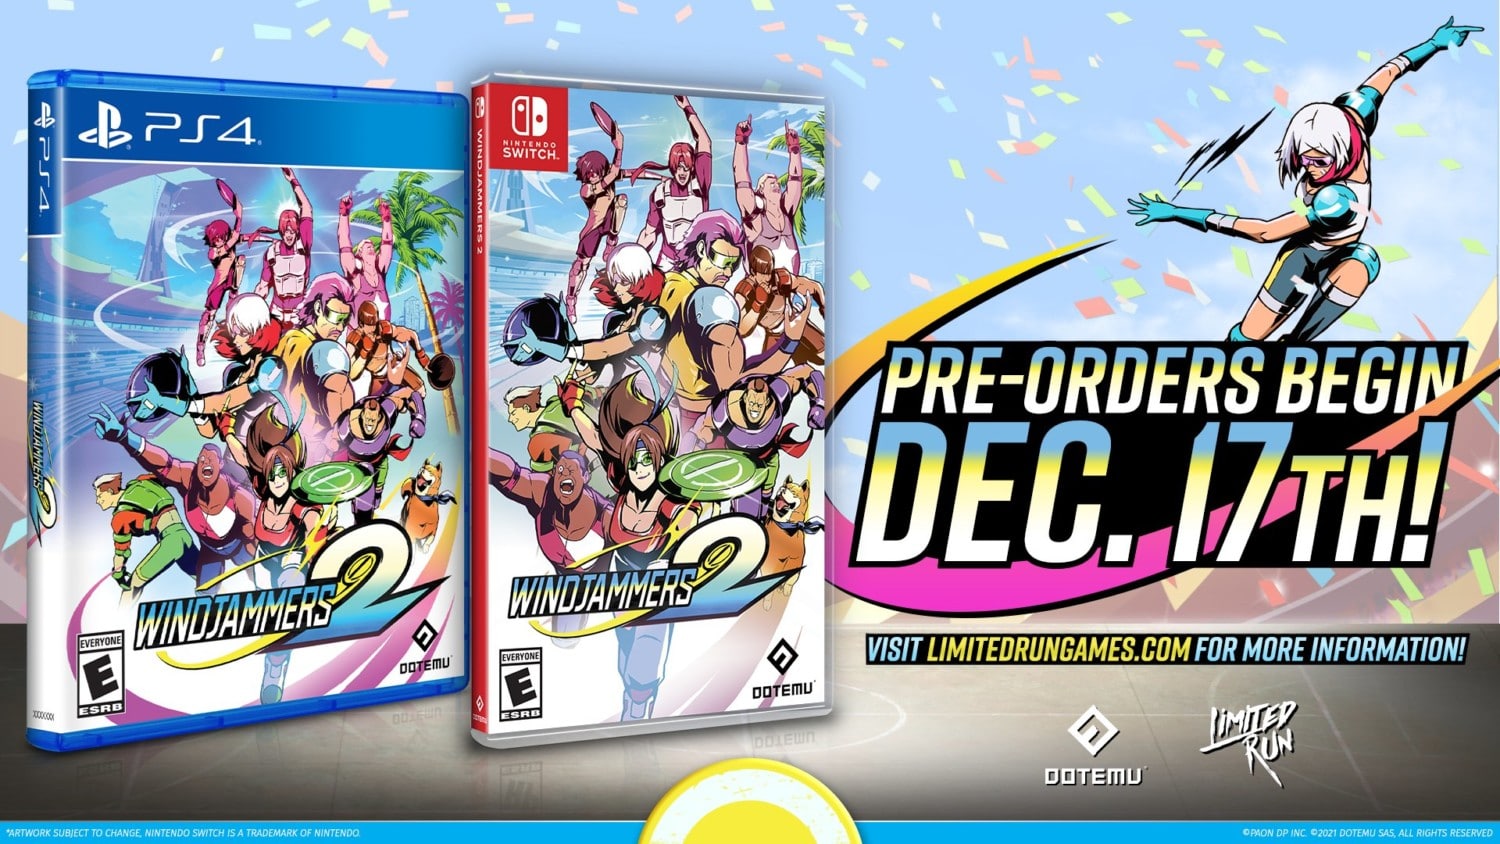 Windjammers 2 Physical Editions, Pre-Orders started December 17